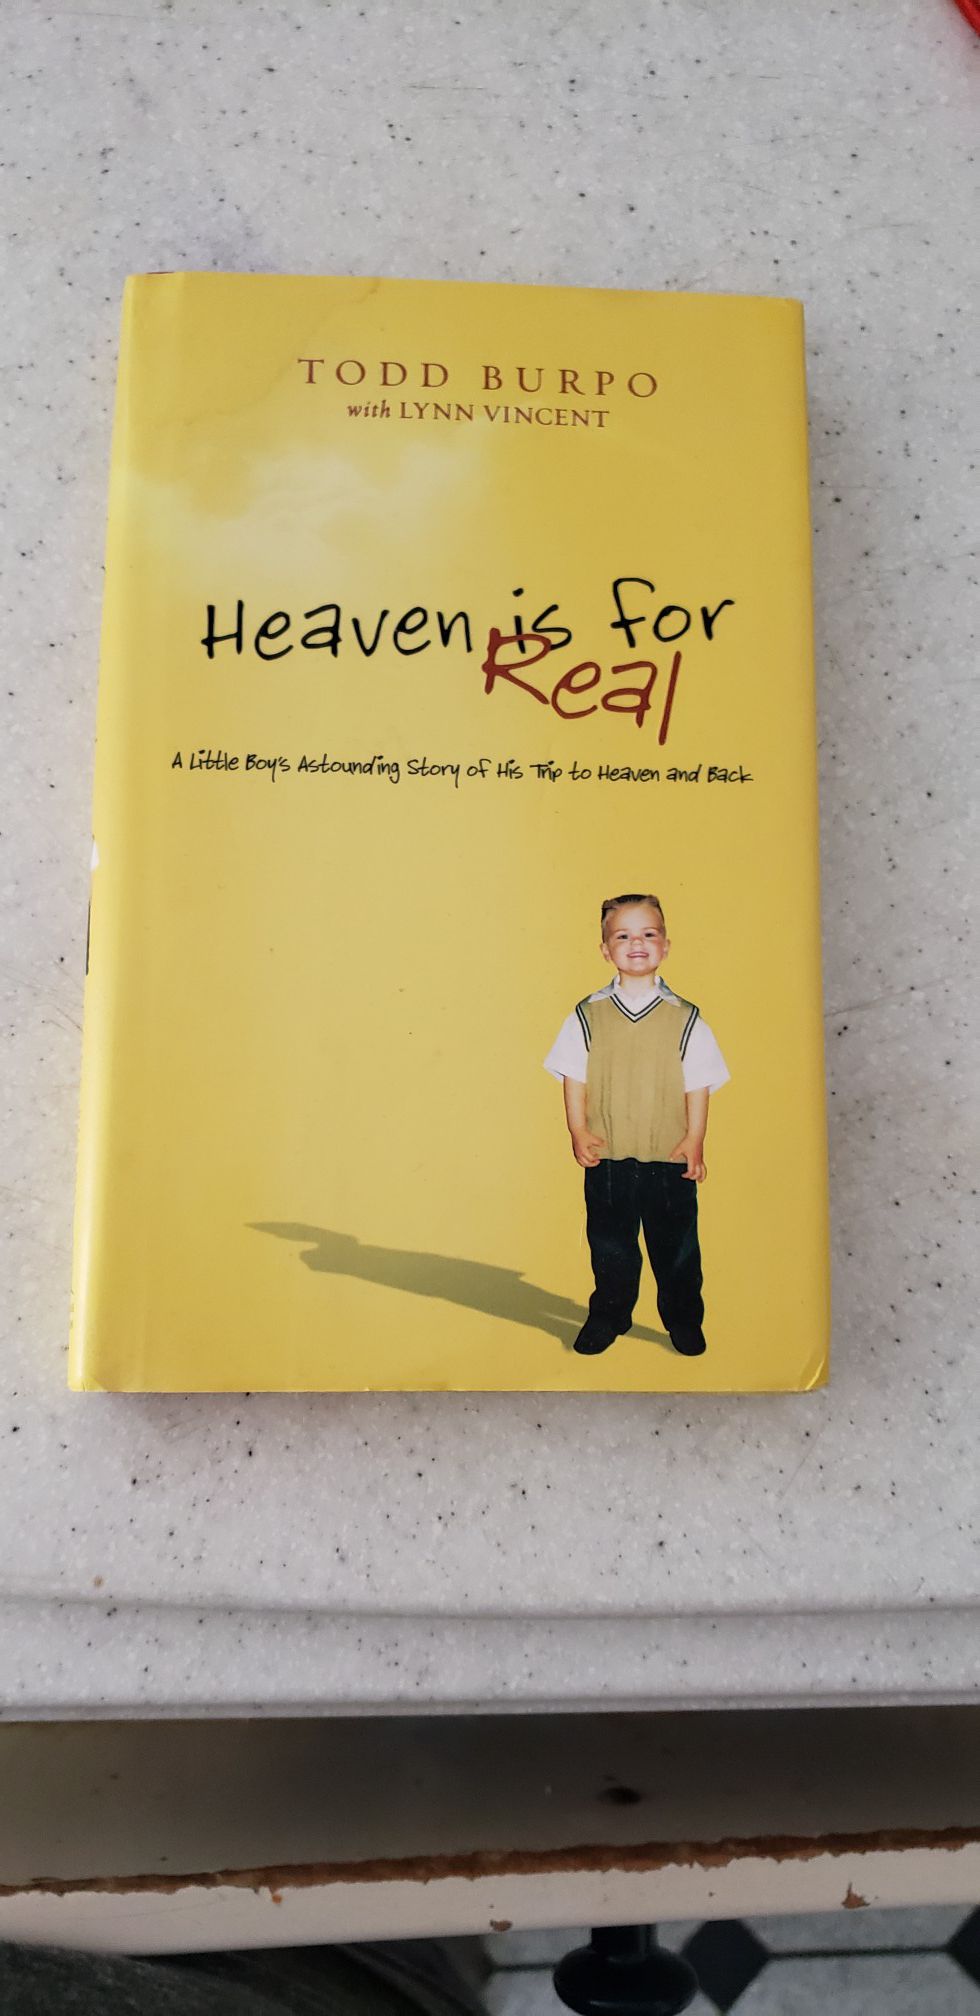 Heaven is for Real: A Little Boy's Astounding Story of His Trip to Heaven and Back. Hardback book, Condition is Like New.